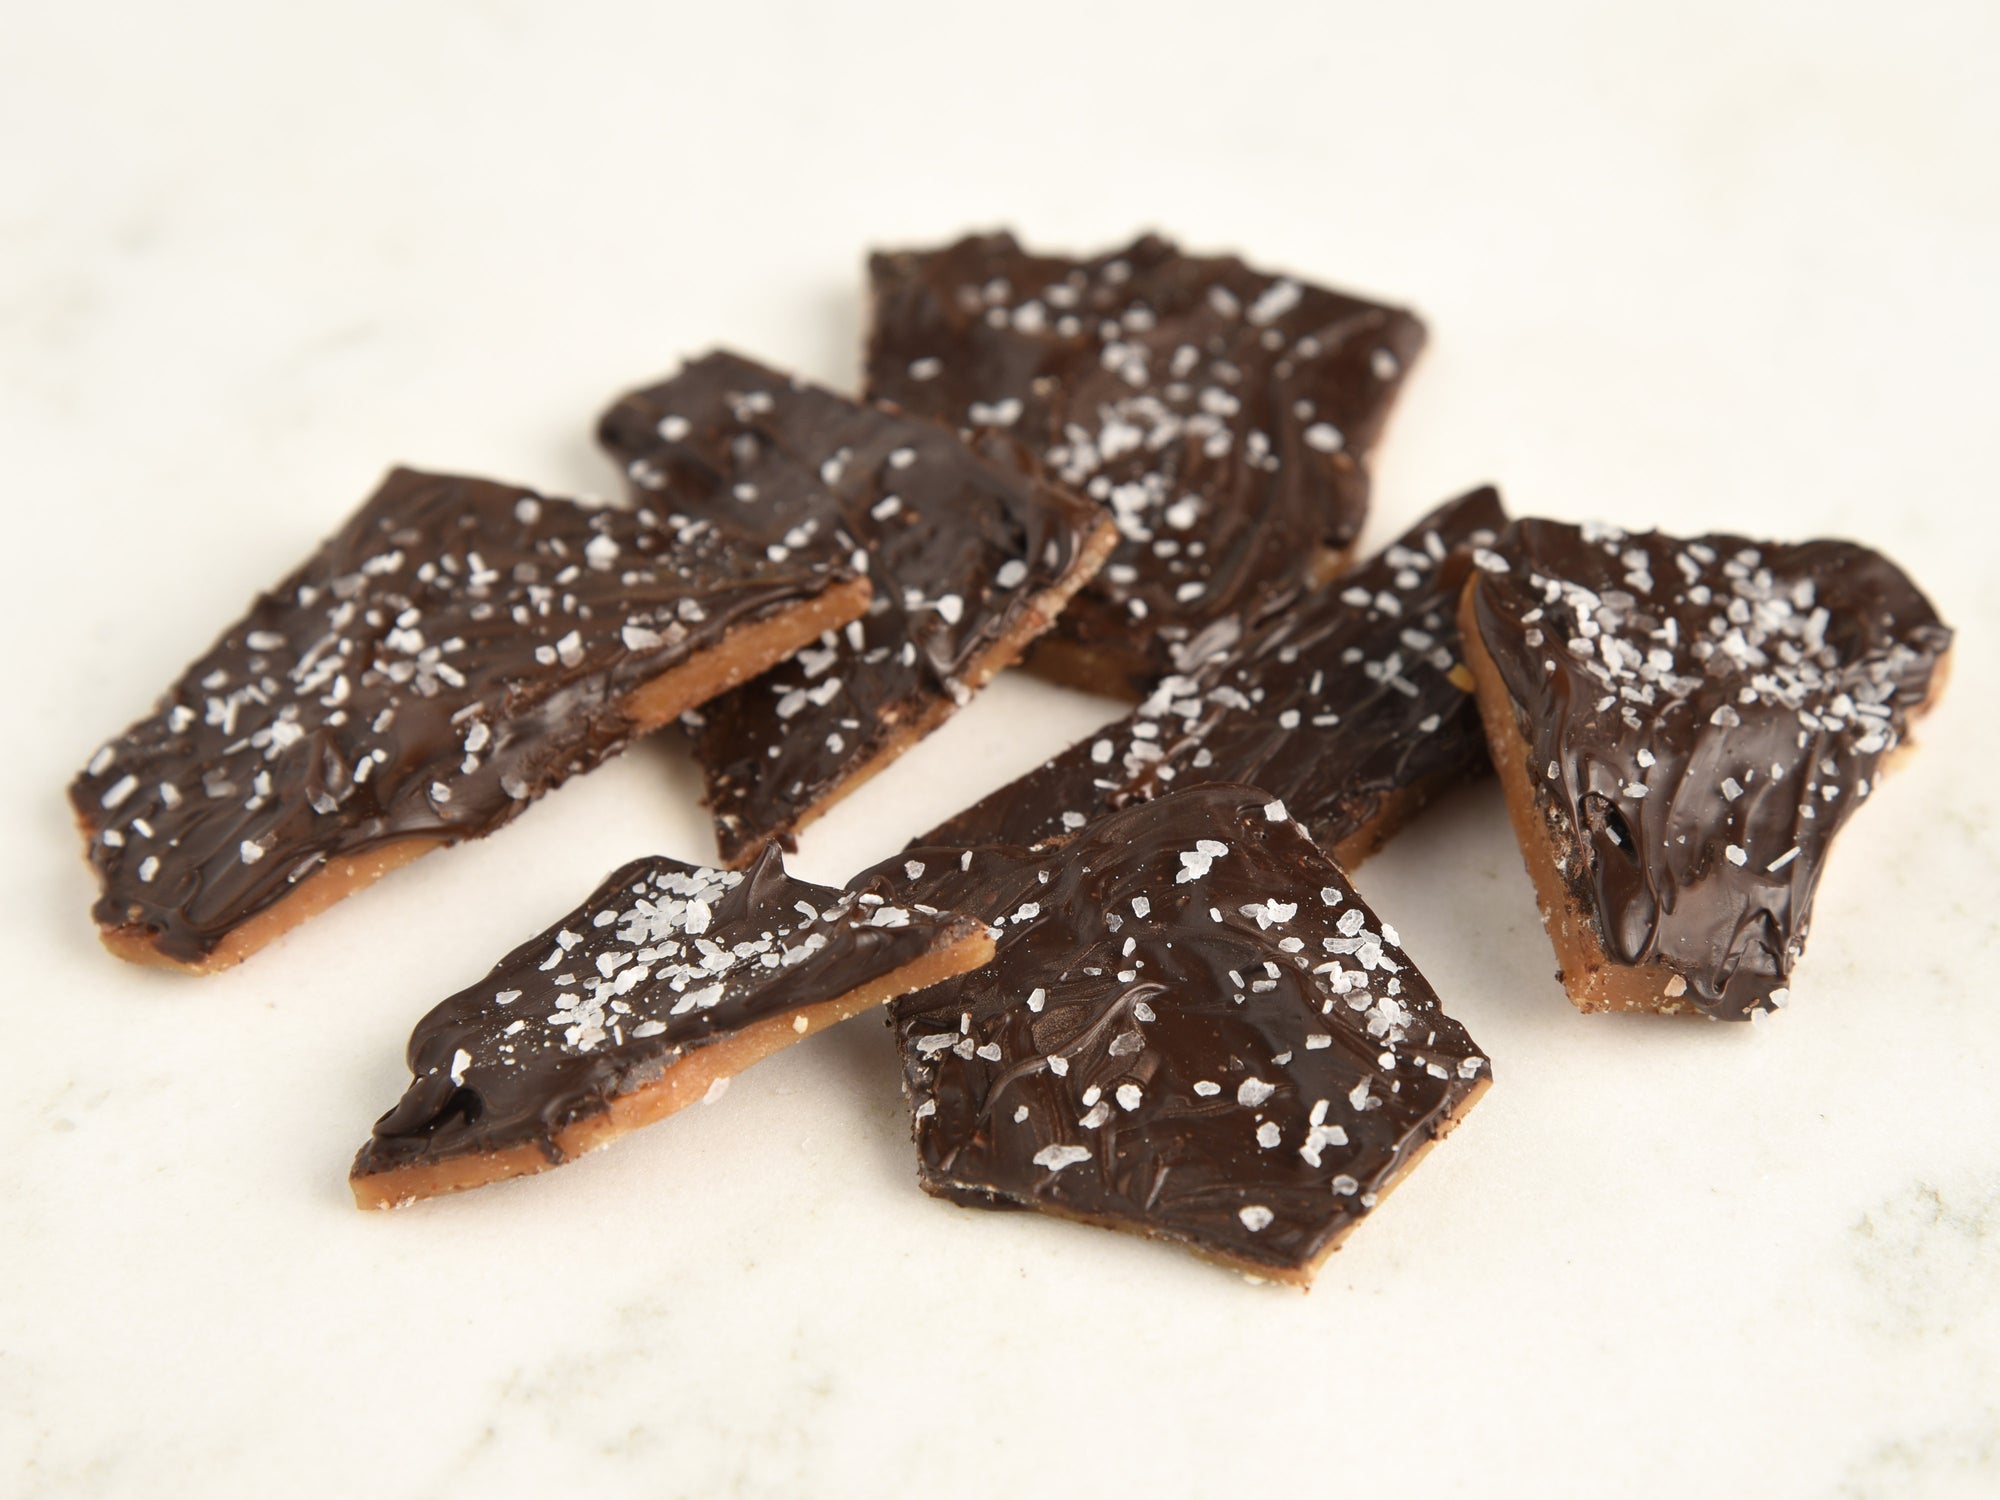 Cracked Toffee with sea salt